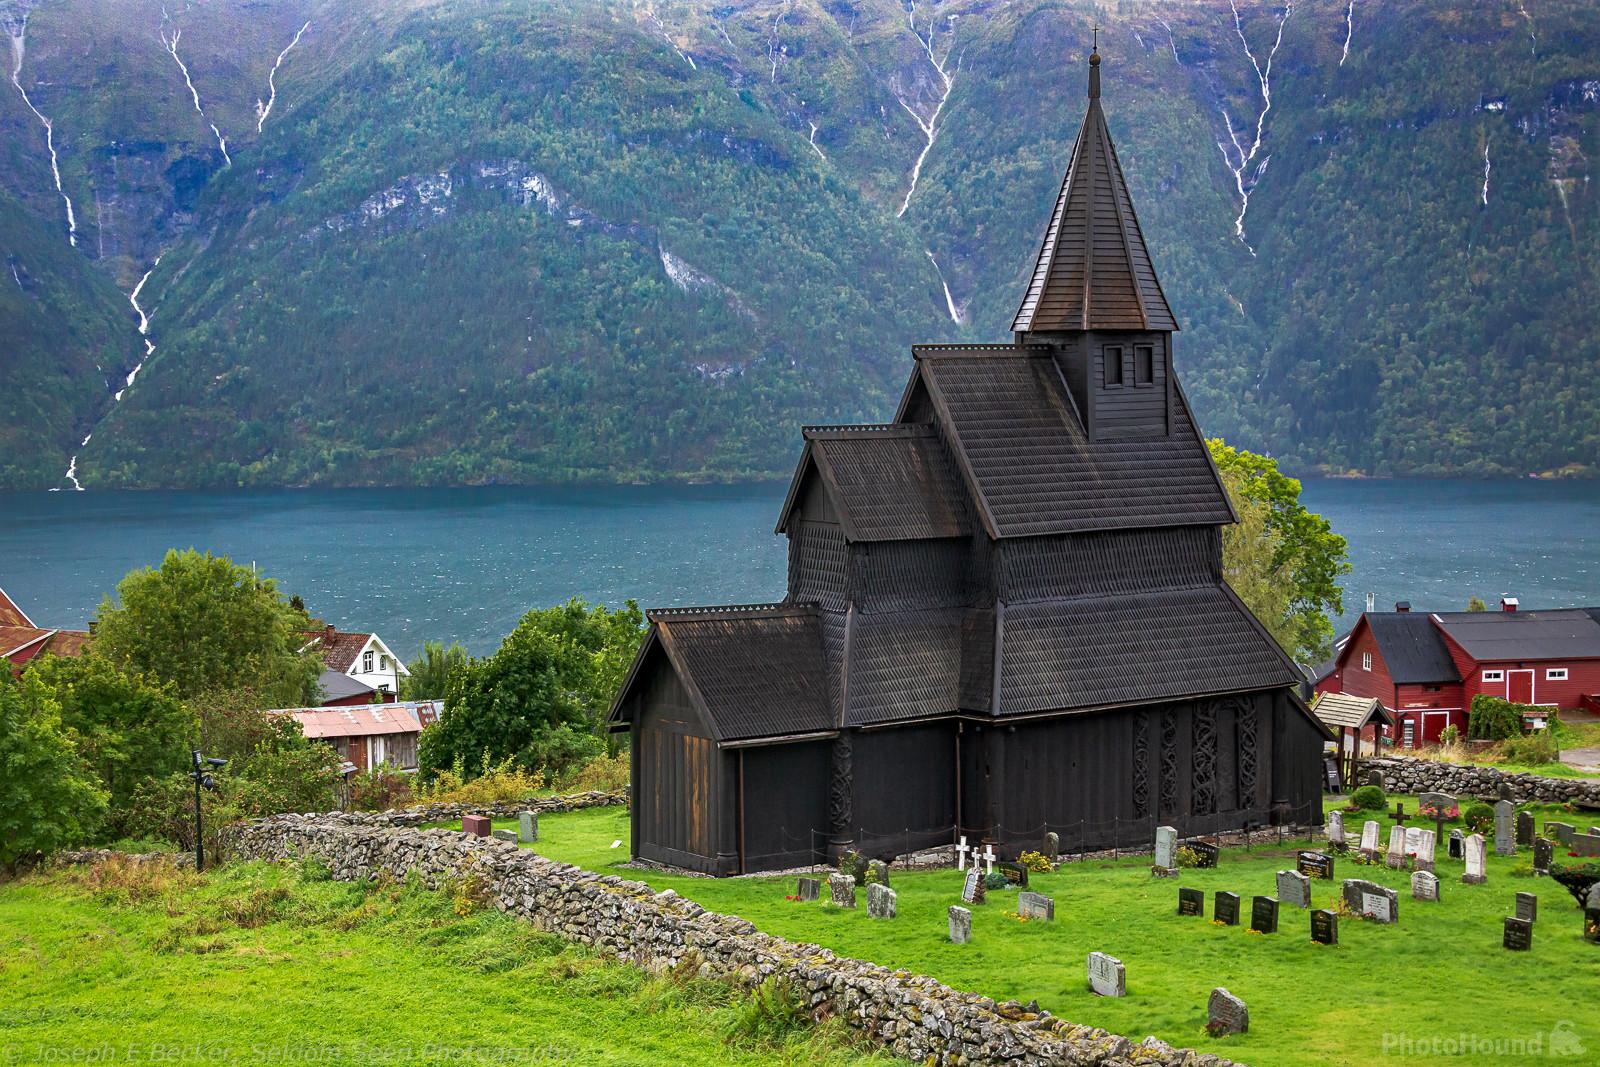 Image of Urnes Stave Church - exterior by Joe Becker